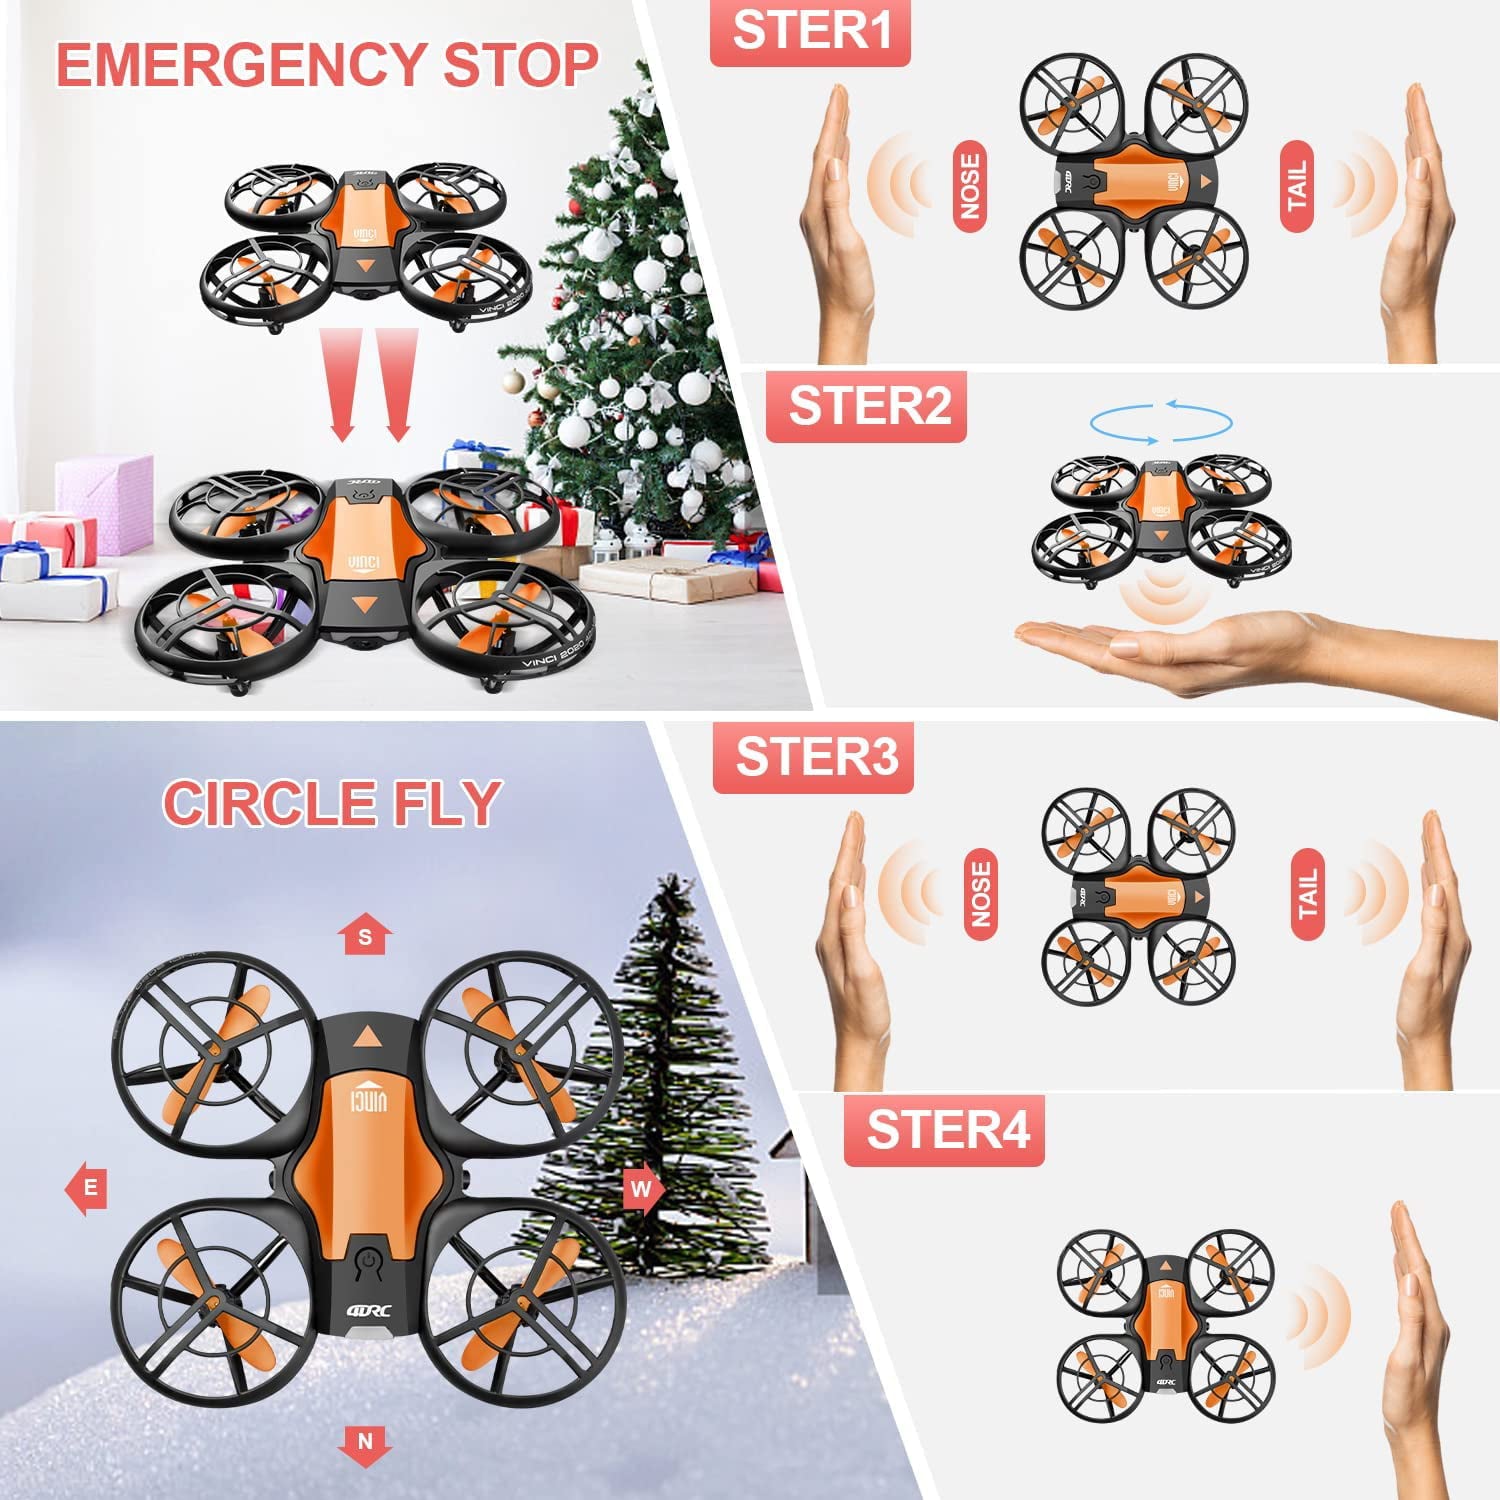 4DRC V8c Drone with 720P HD Camera for Adults and Children FPV Real-time Video， 2 Modular Batteries and Storage Bag， Orange